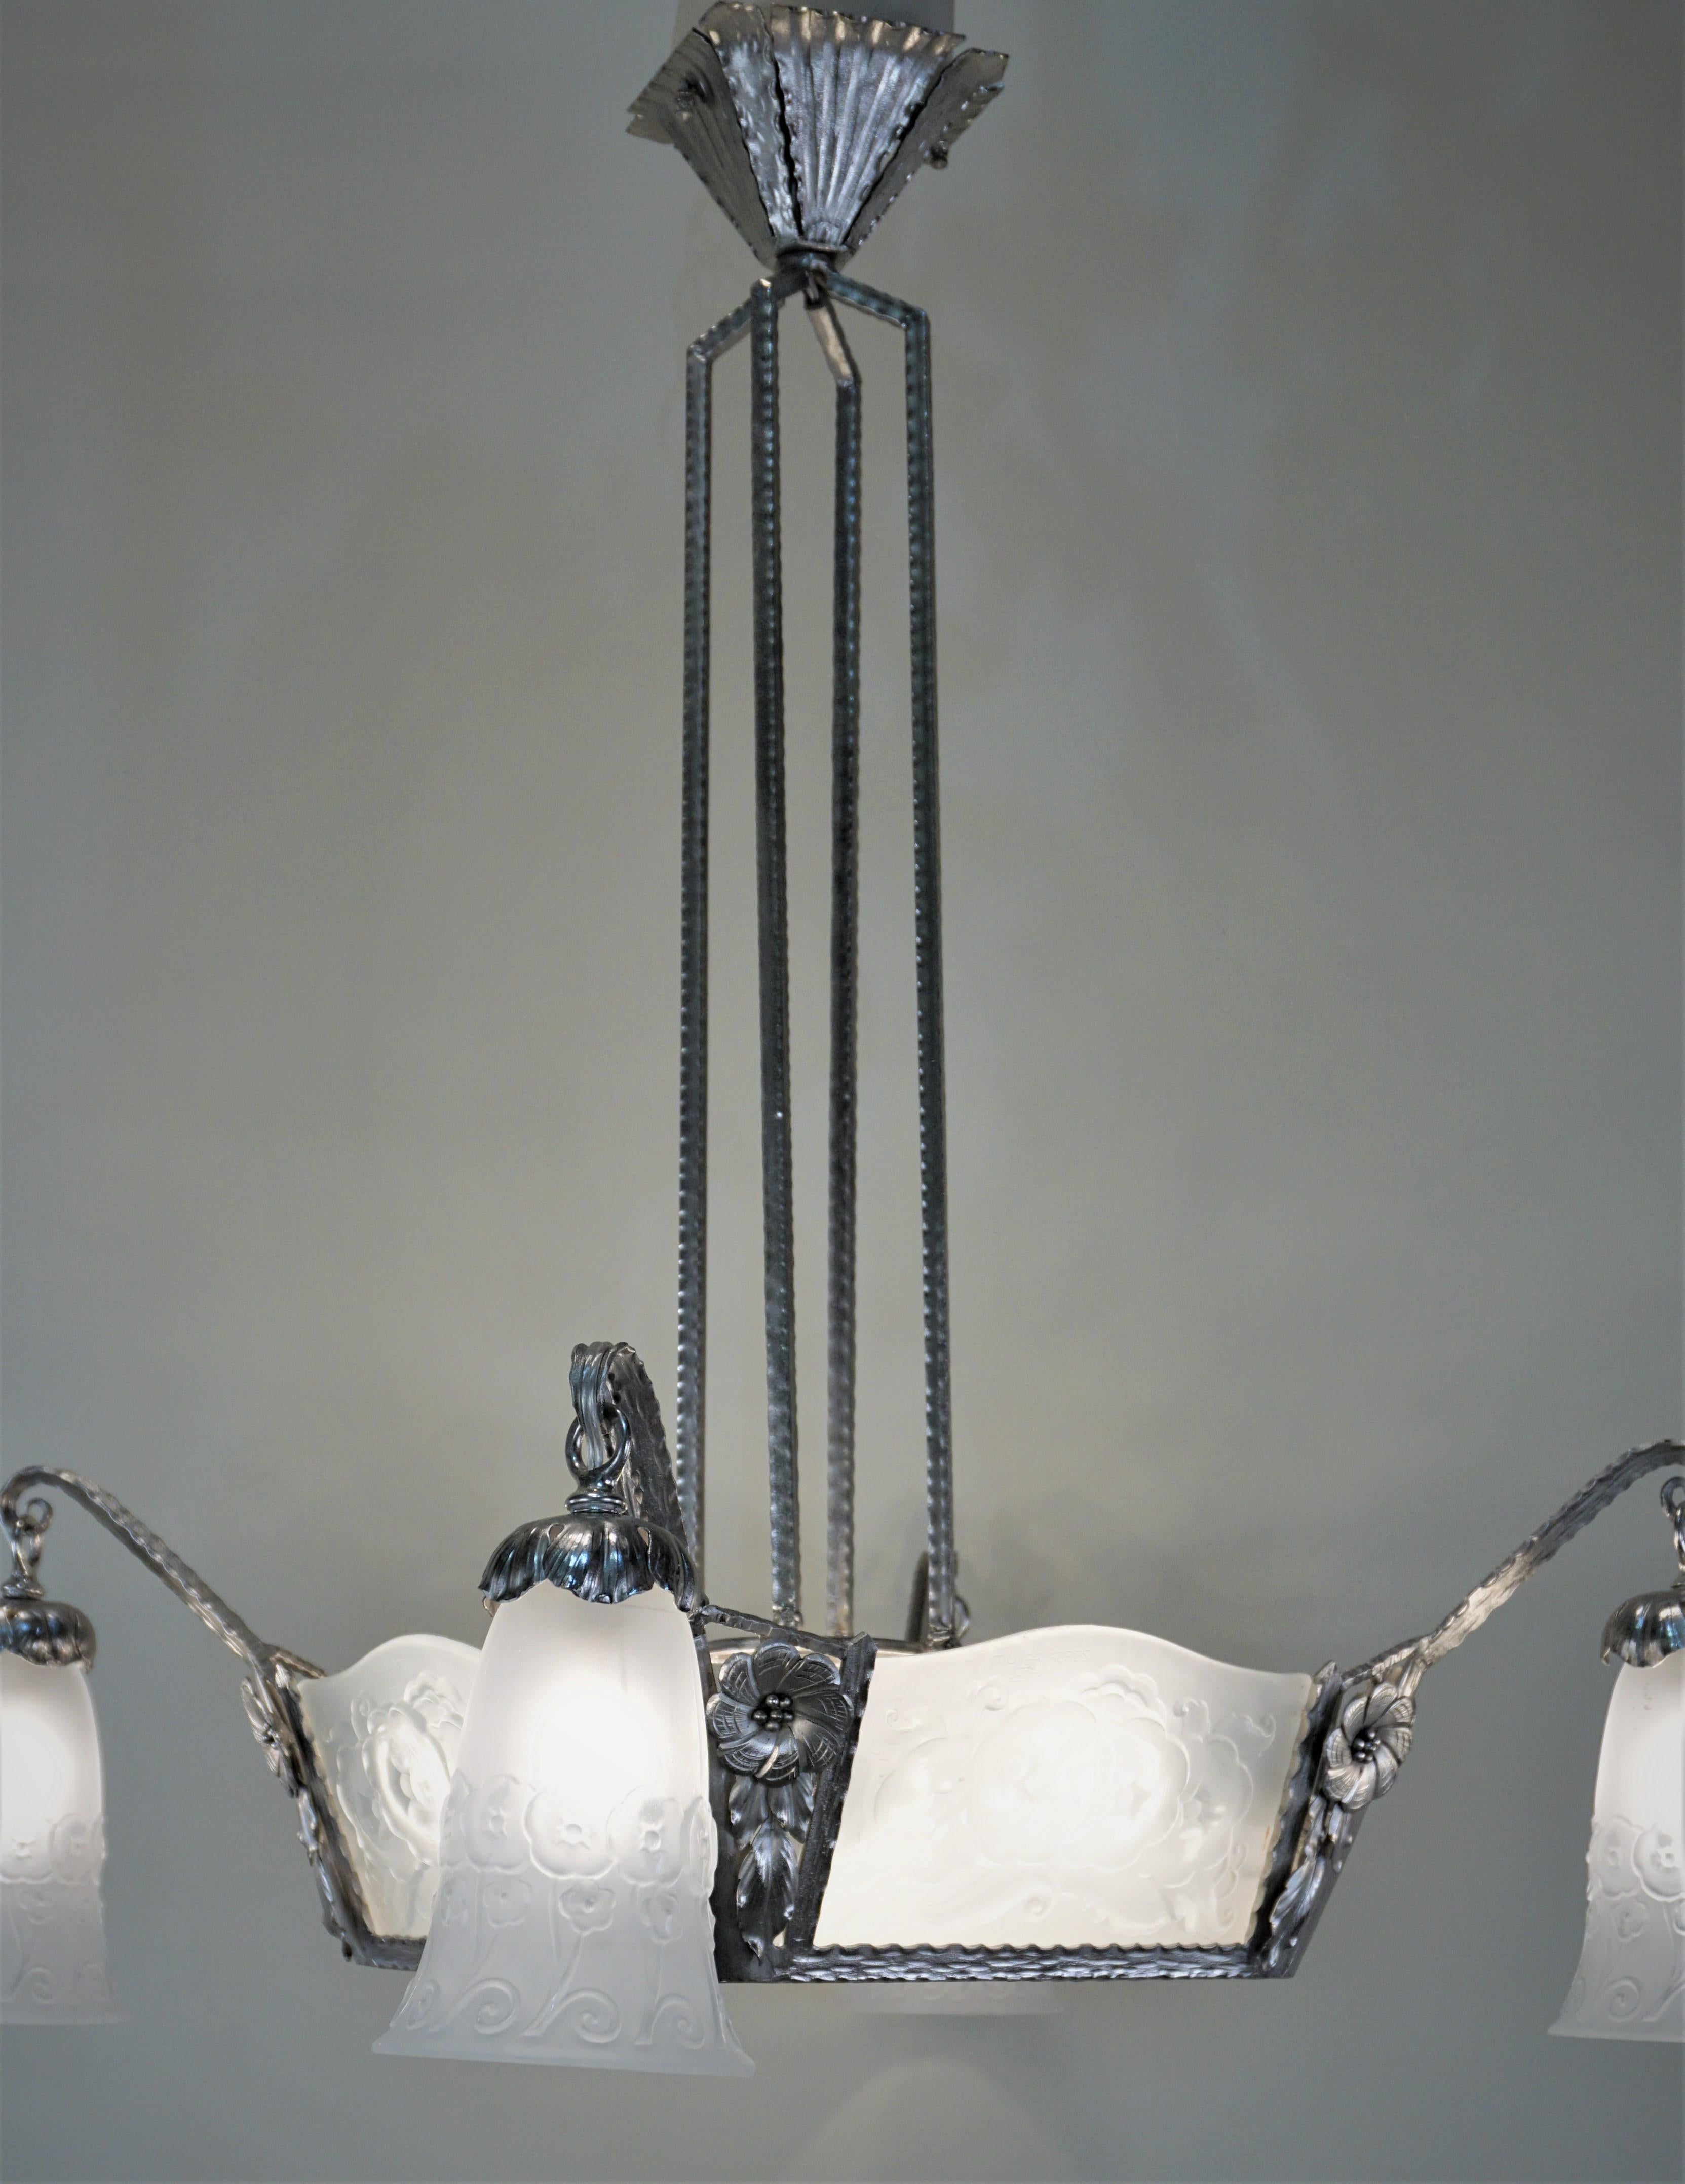 This elegant art deco chandelier was designed and produced by Muller Freres in Luneville in the 1920s. It features four side molded clear frost glass with high light polished and four down light as well as center cut glass.
Total of 16 light 60